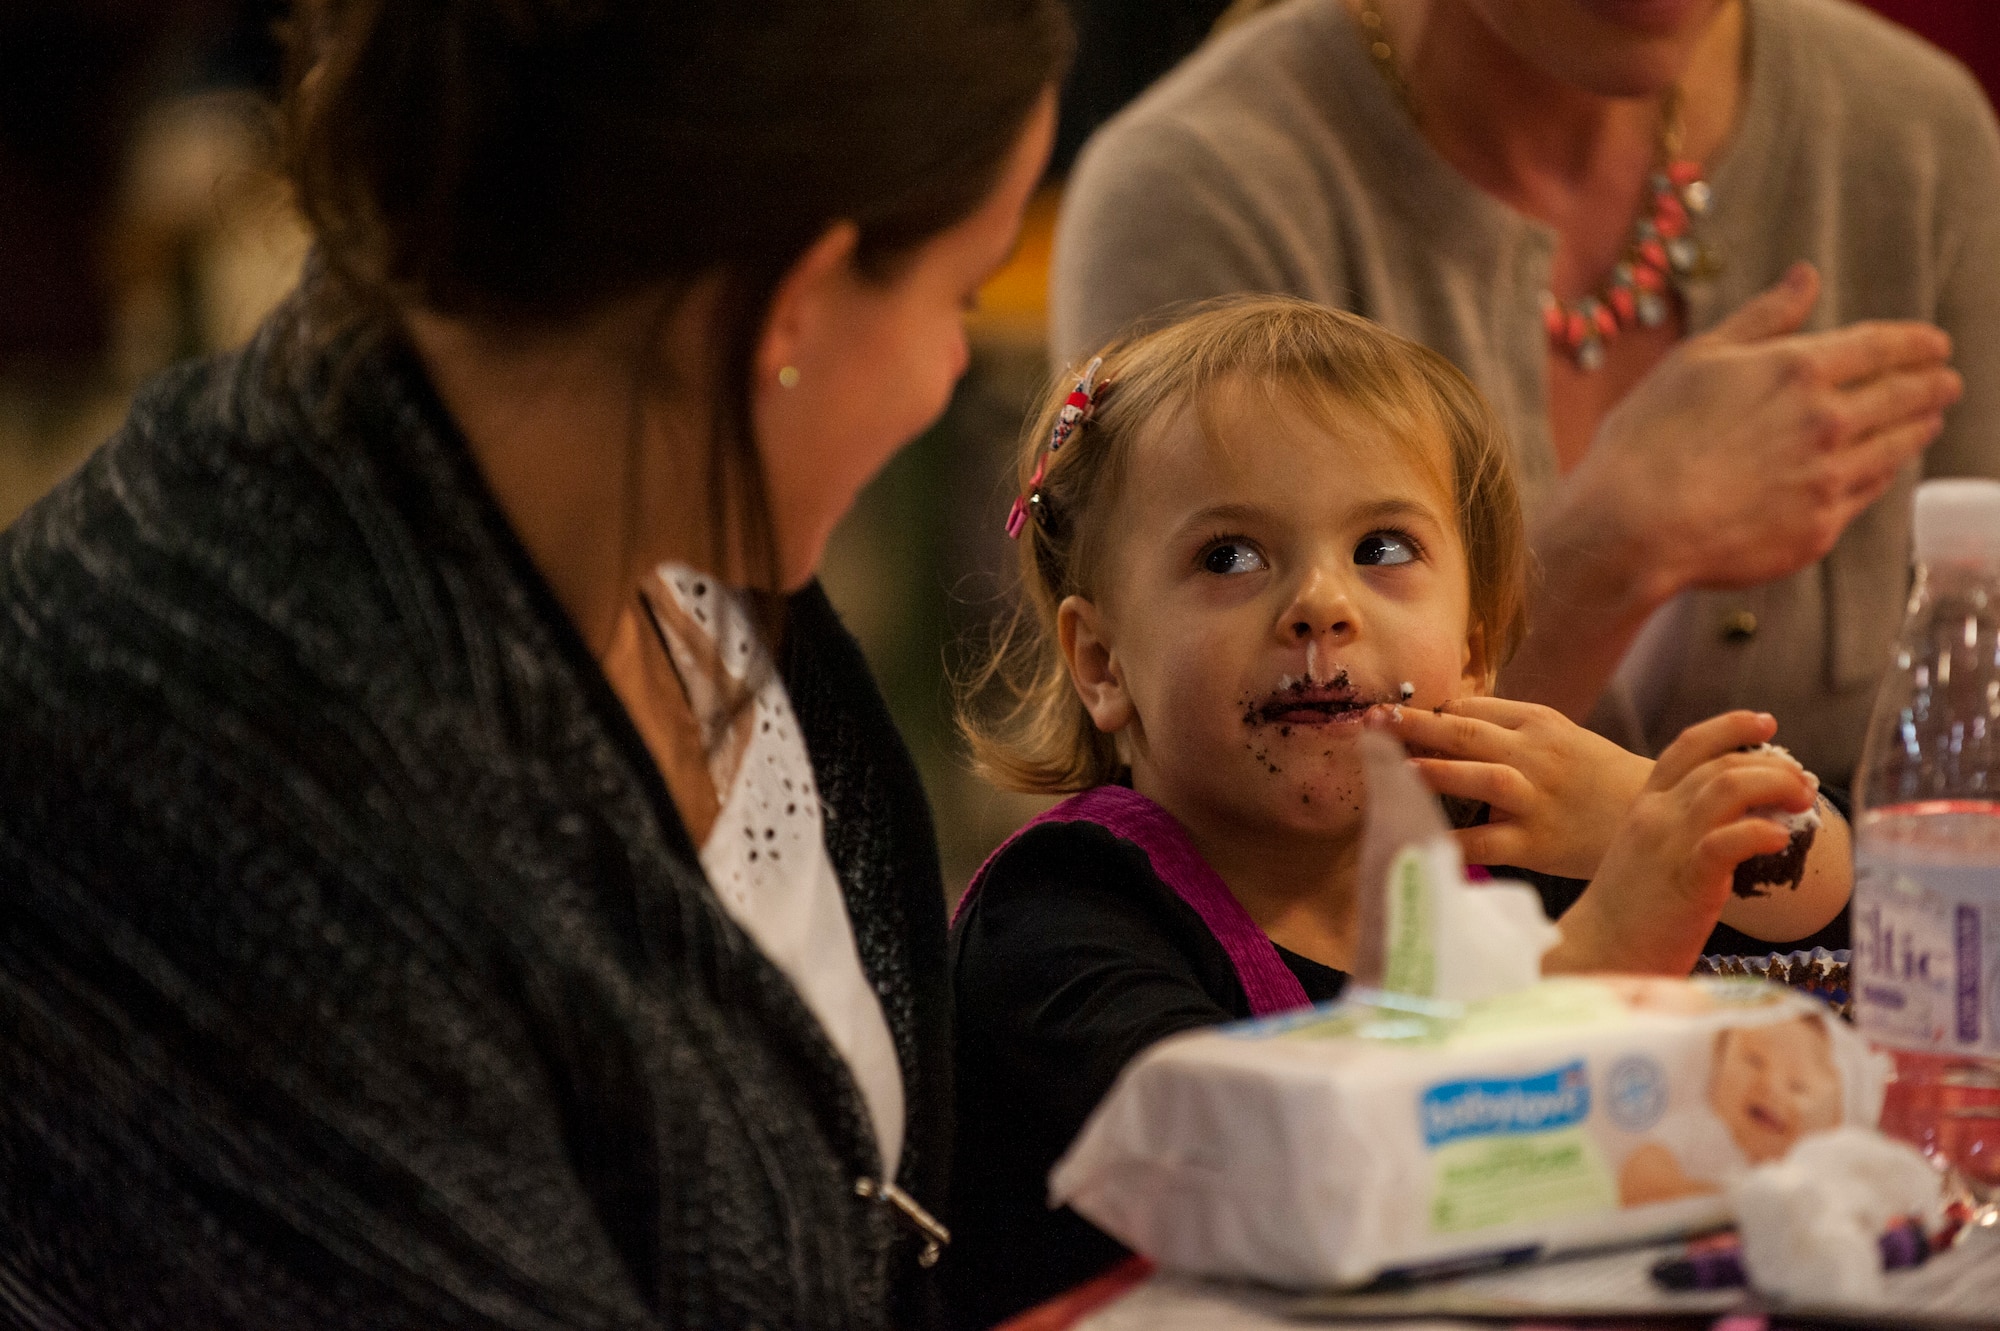 A child looks at her mom while she eats a cupcake during the Deployed Family Member Thanksgiving dinner inside Fire Station 1 at Spangdahlem Air Base, Germany, Nov. 18, 2015. The Airman and Family Readiness Center hosted this year’s Thanksgiving dinner.(U.S. Air Force photo by Senior Airman Rusty Frank/Released)
